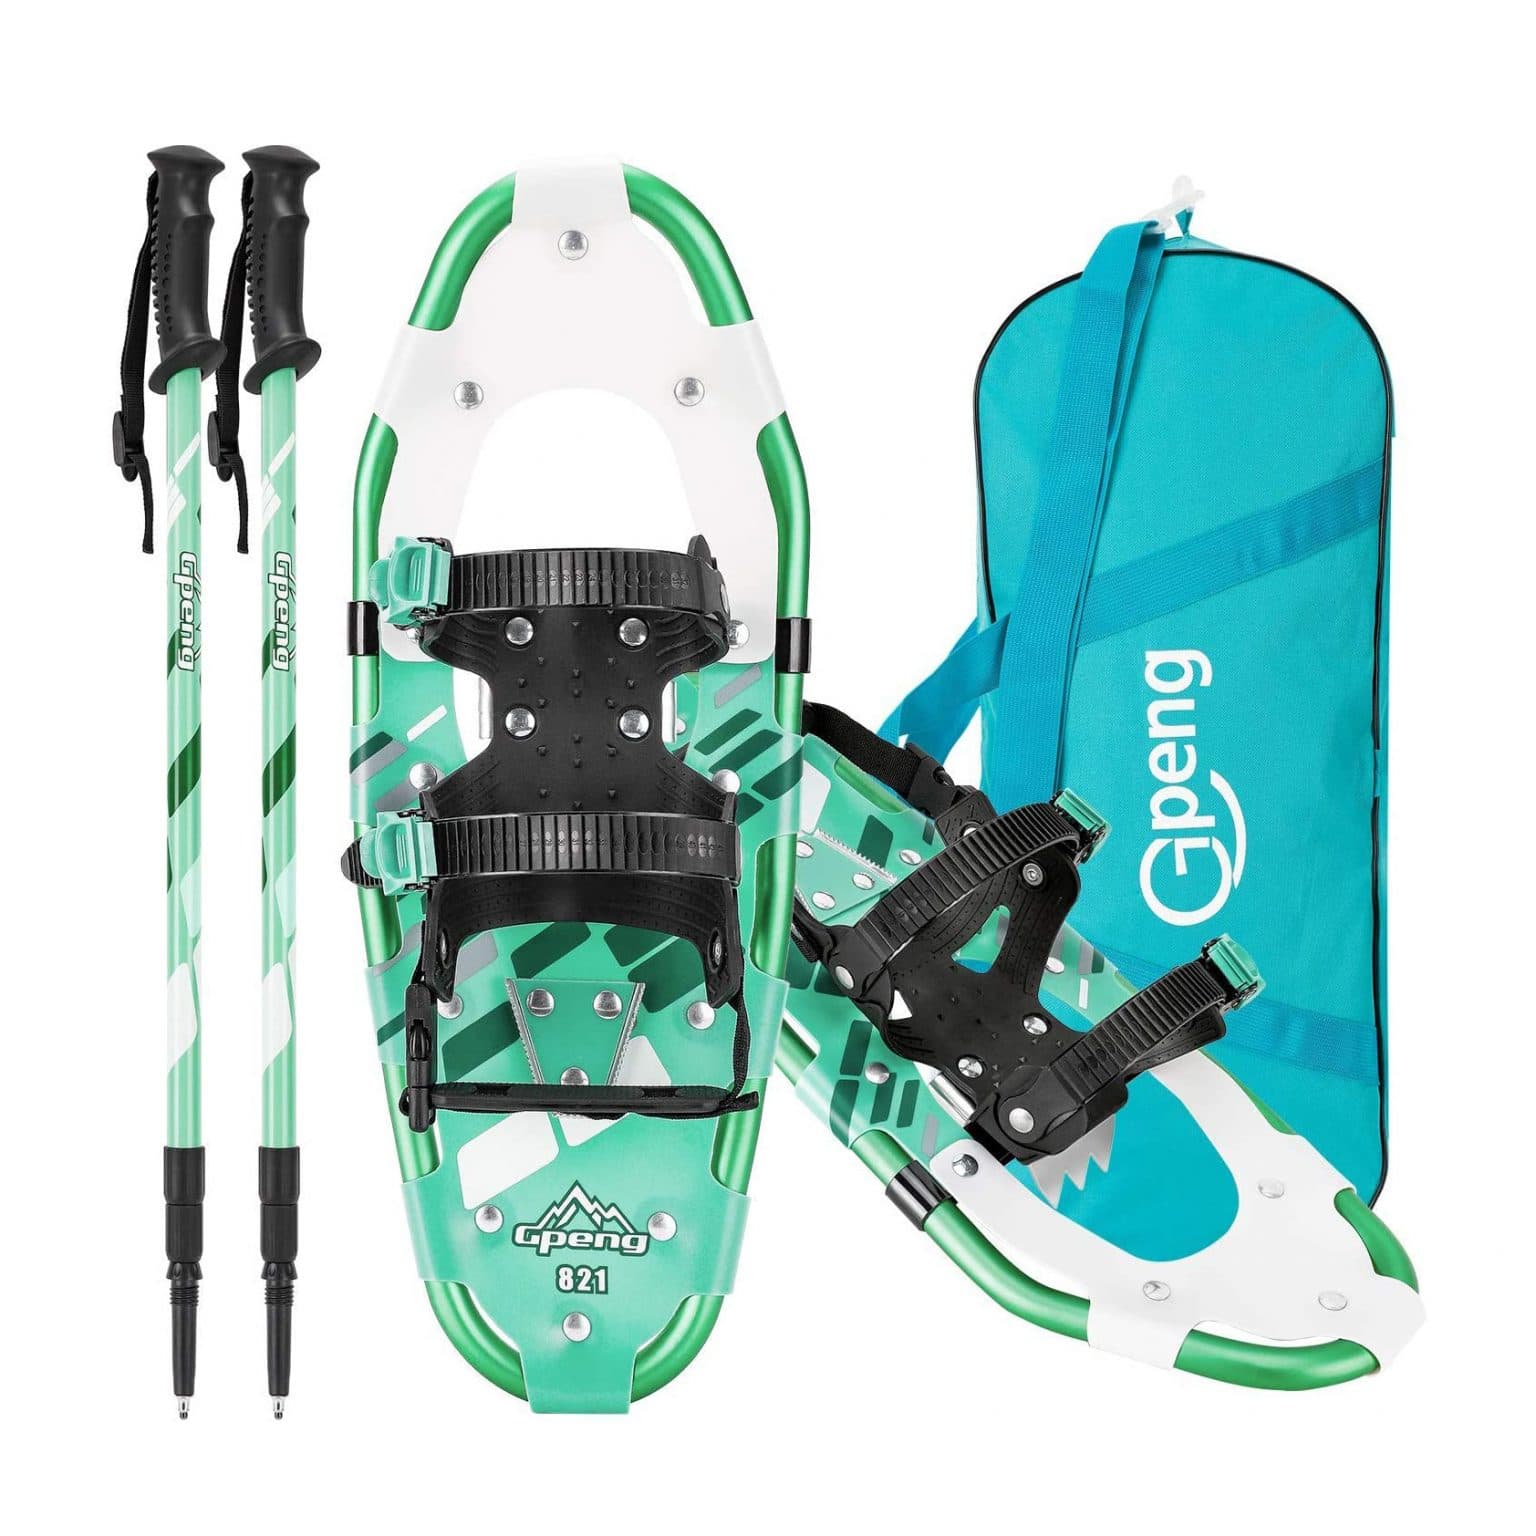 Top 10 Best Snow Shoes in 2021 Reviews Buyer’s Guide